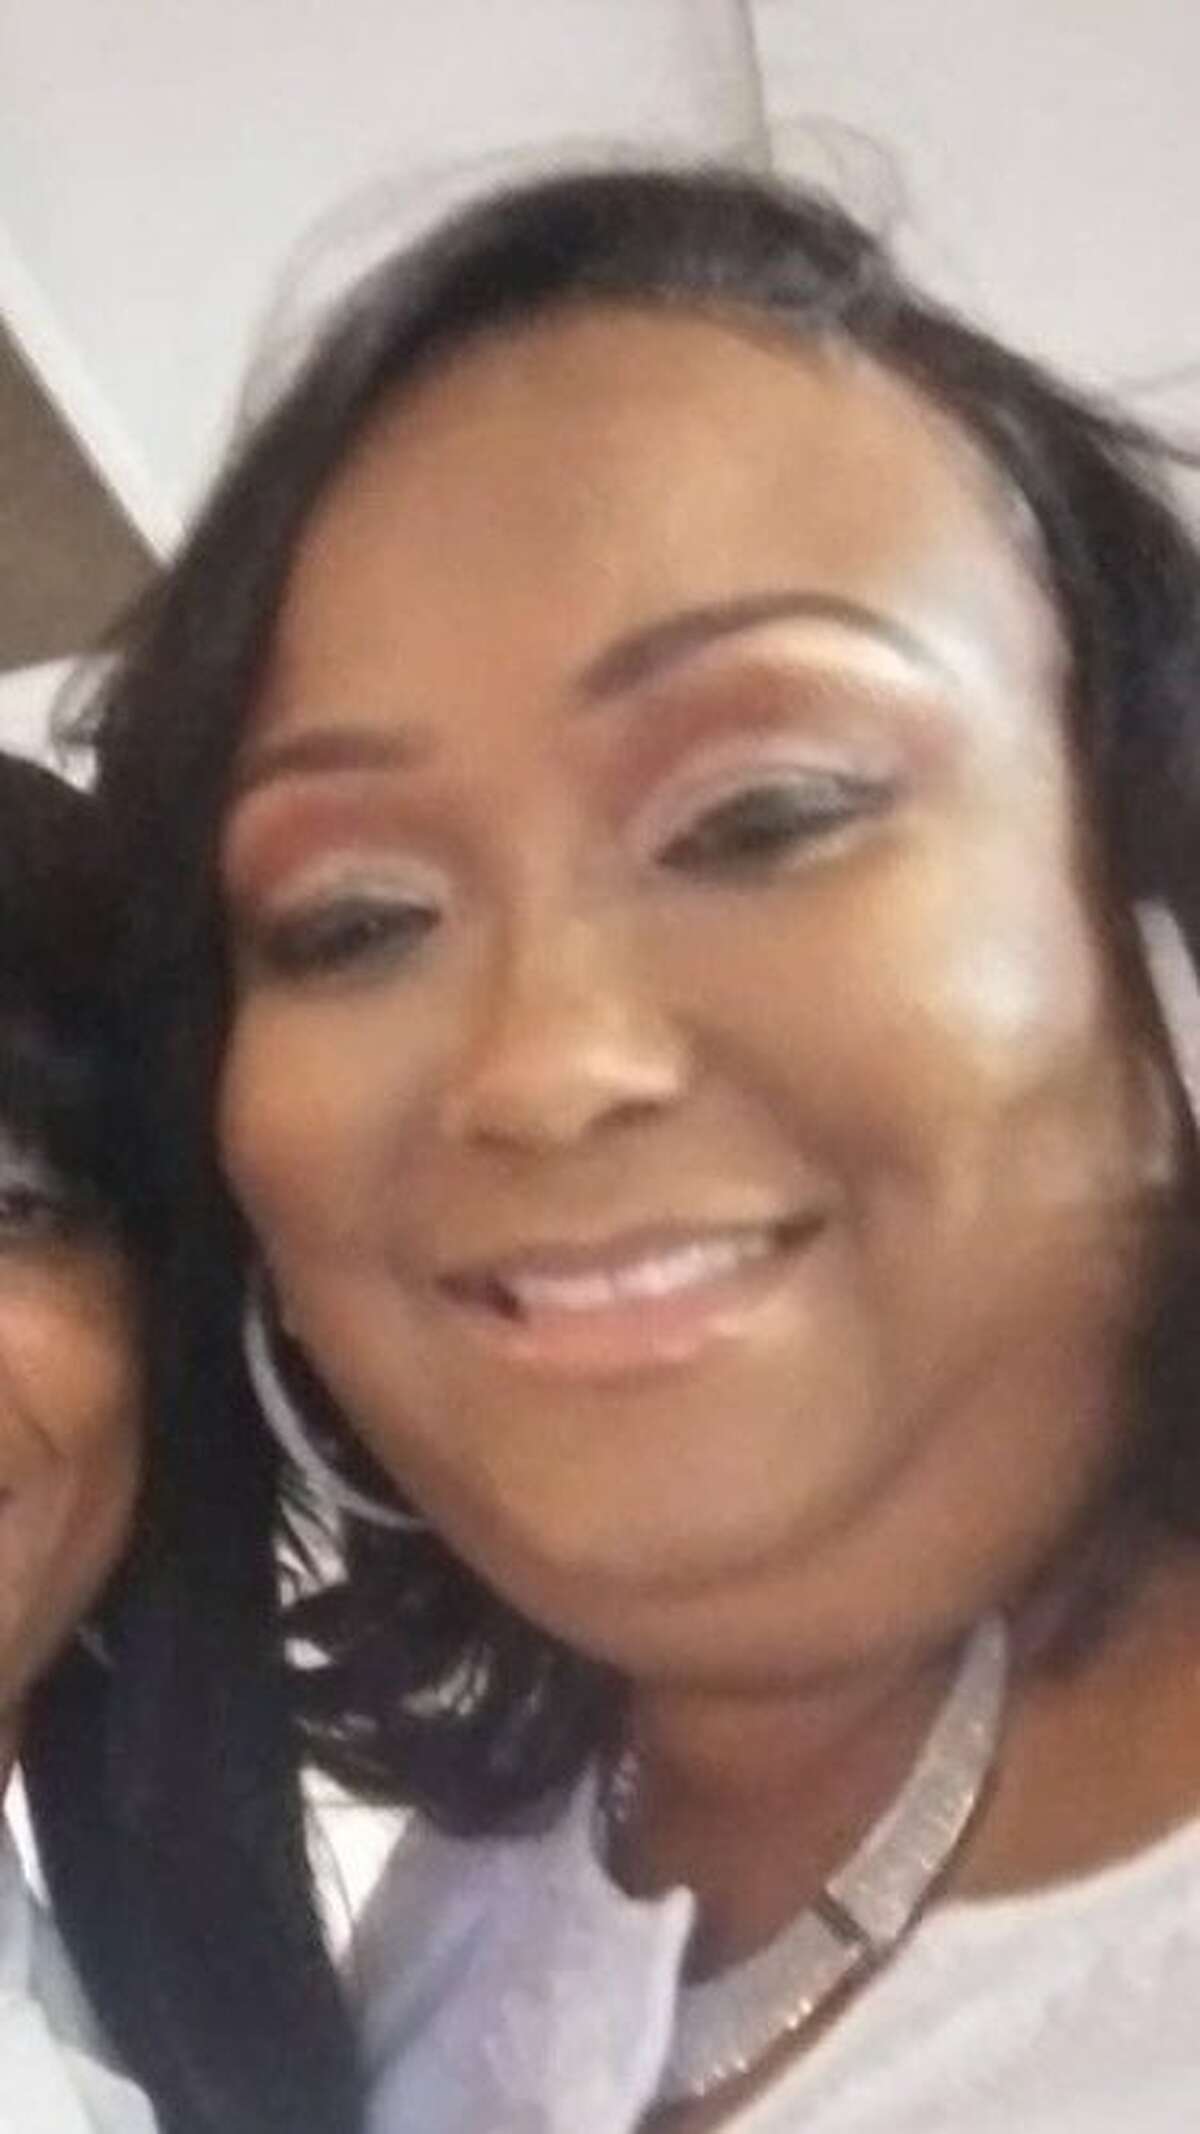 A photo of Lashawn Buffin, one of the 15 people slain in Oakland in January. Buffin was gunned down in her home near the 8300 block of A Street when at least 15 shots were fired just outside on Jan. 16. She died three days later and was not believed to be the target of the attack.